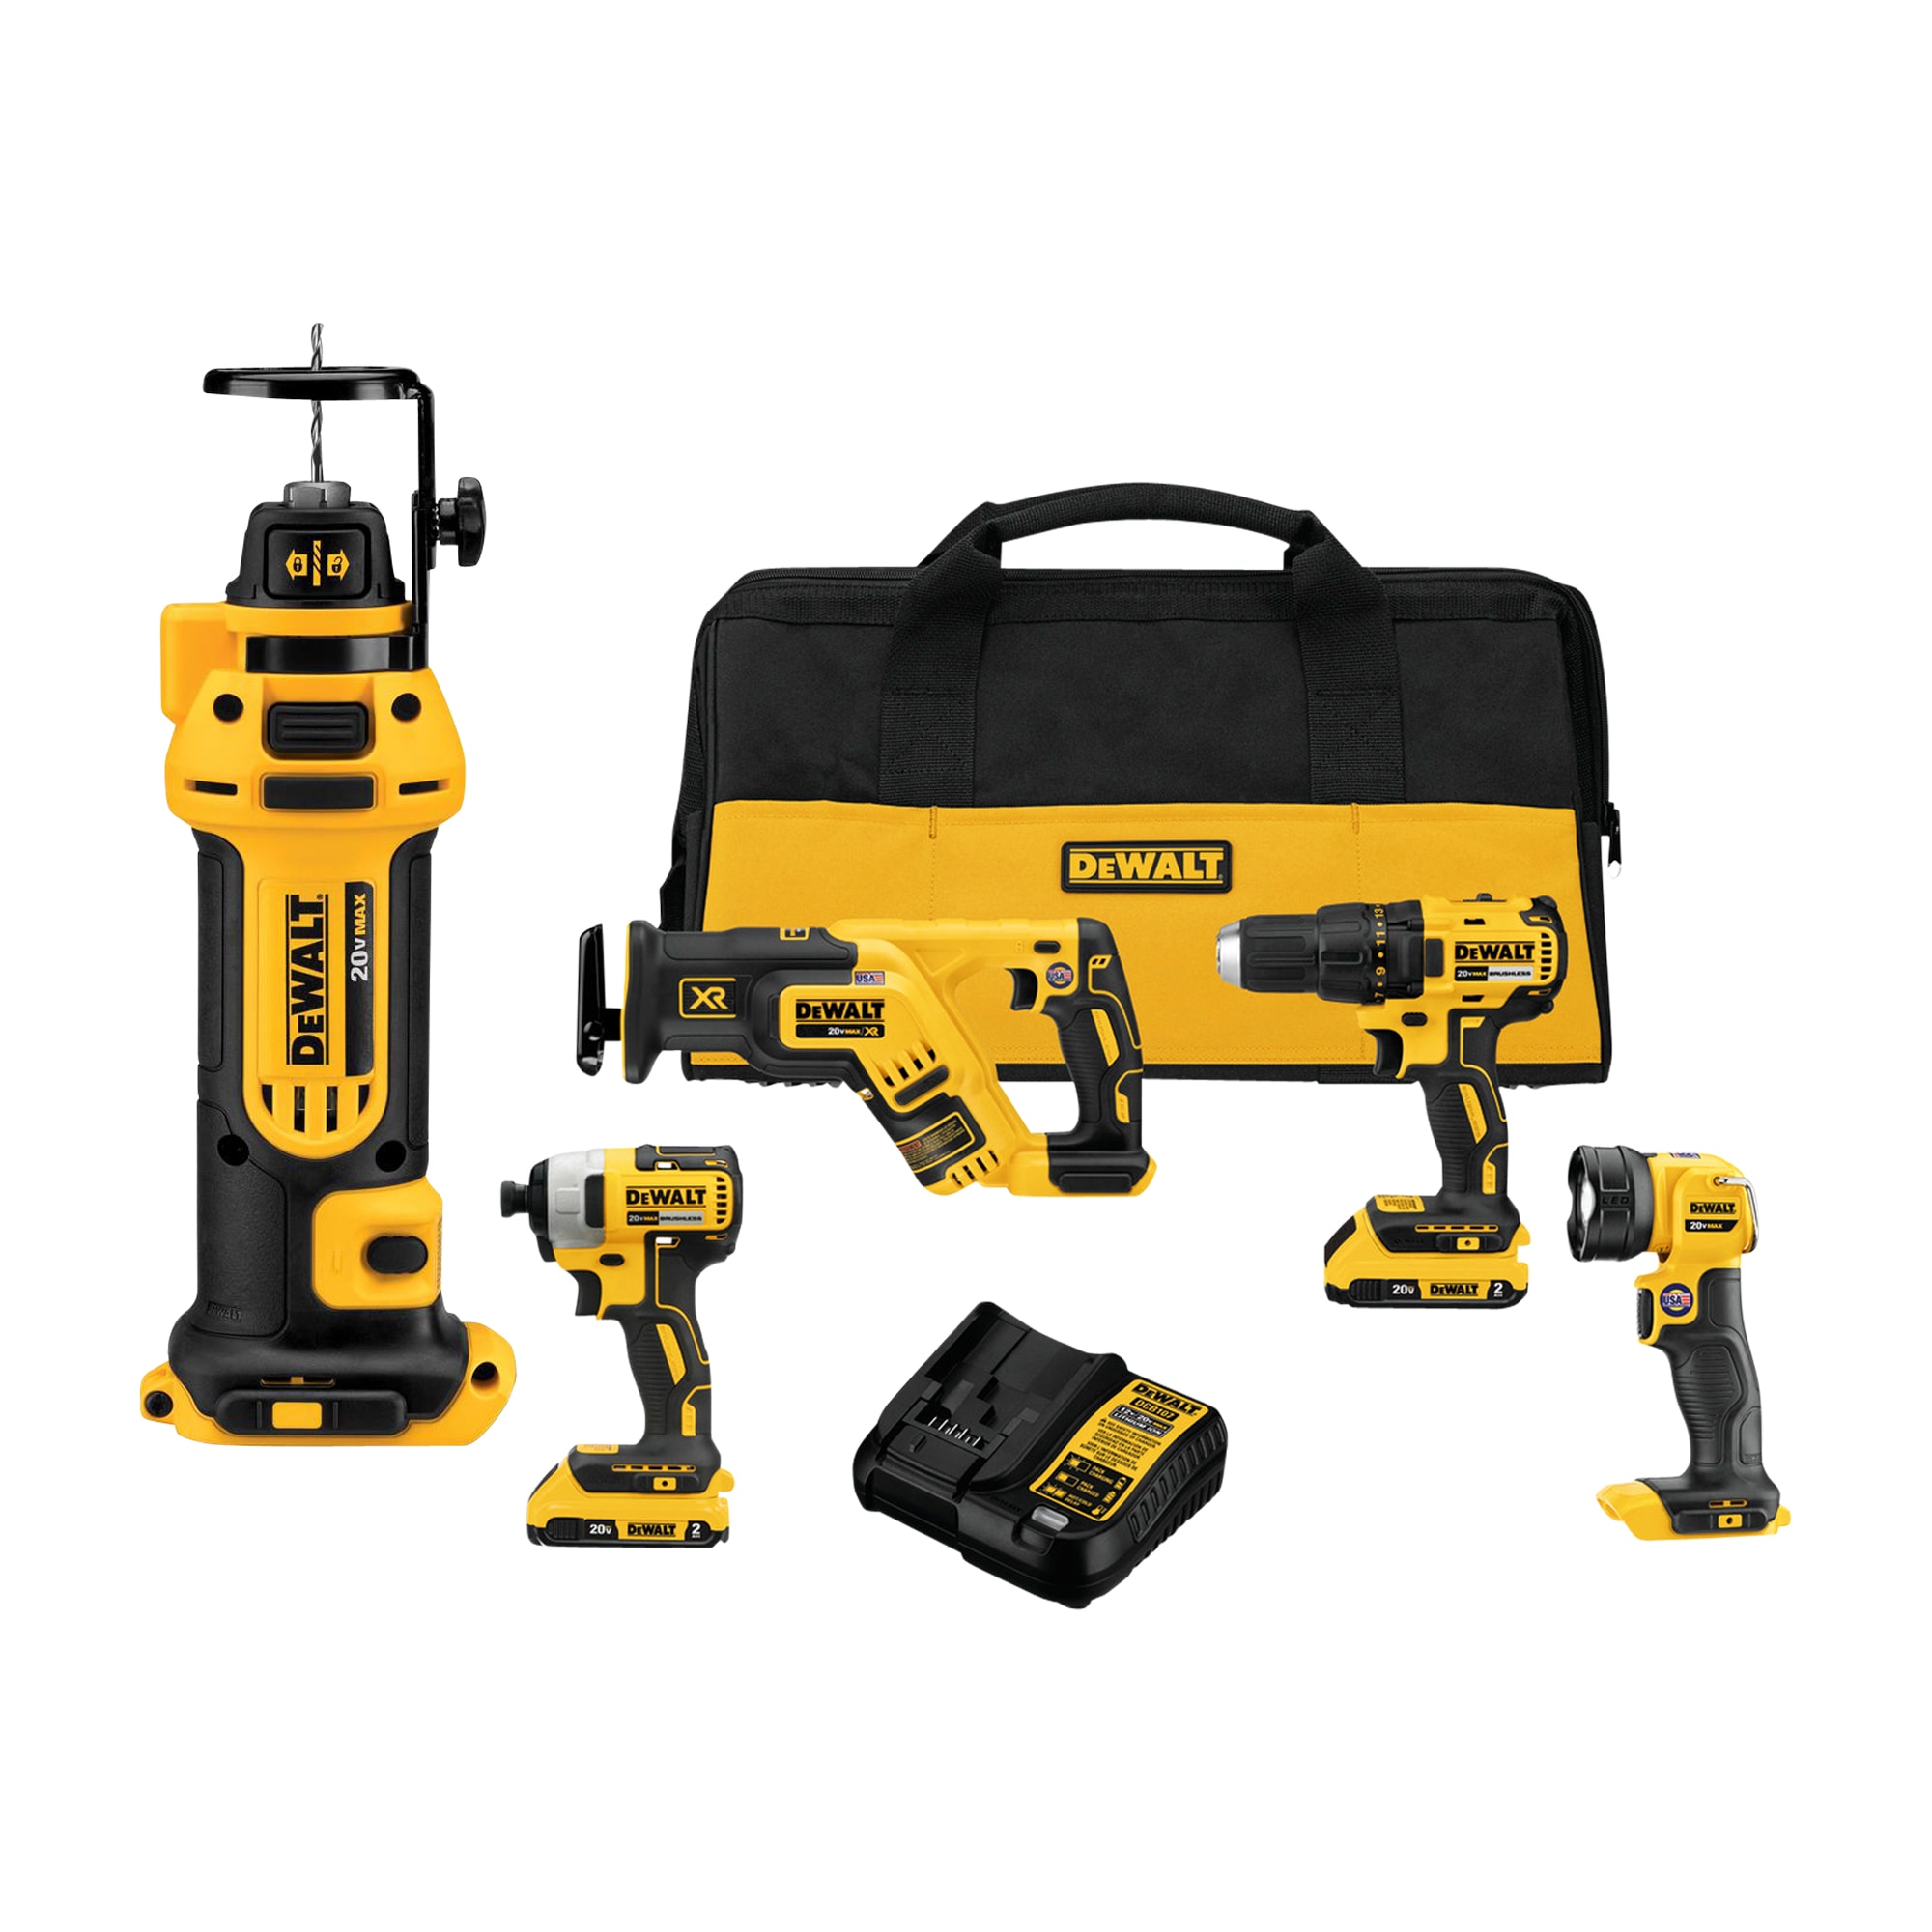 Shop Dewalt 1 Speed Cordless Volt Max Cutting Rotary Tool 4 Tool Volt Max Brushless Power Tool Combo Kit With Soft Case 2 Batteries And Charger Included At Lowes Com